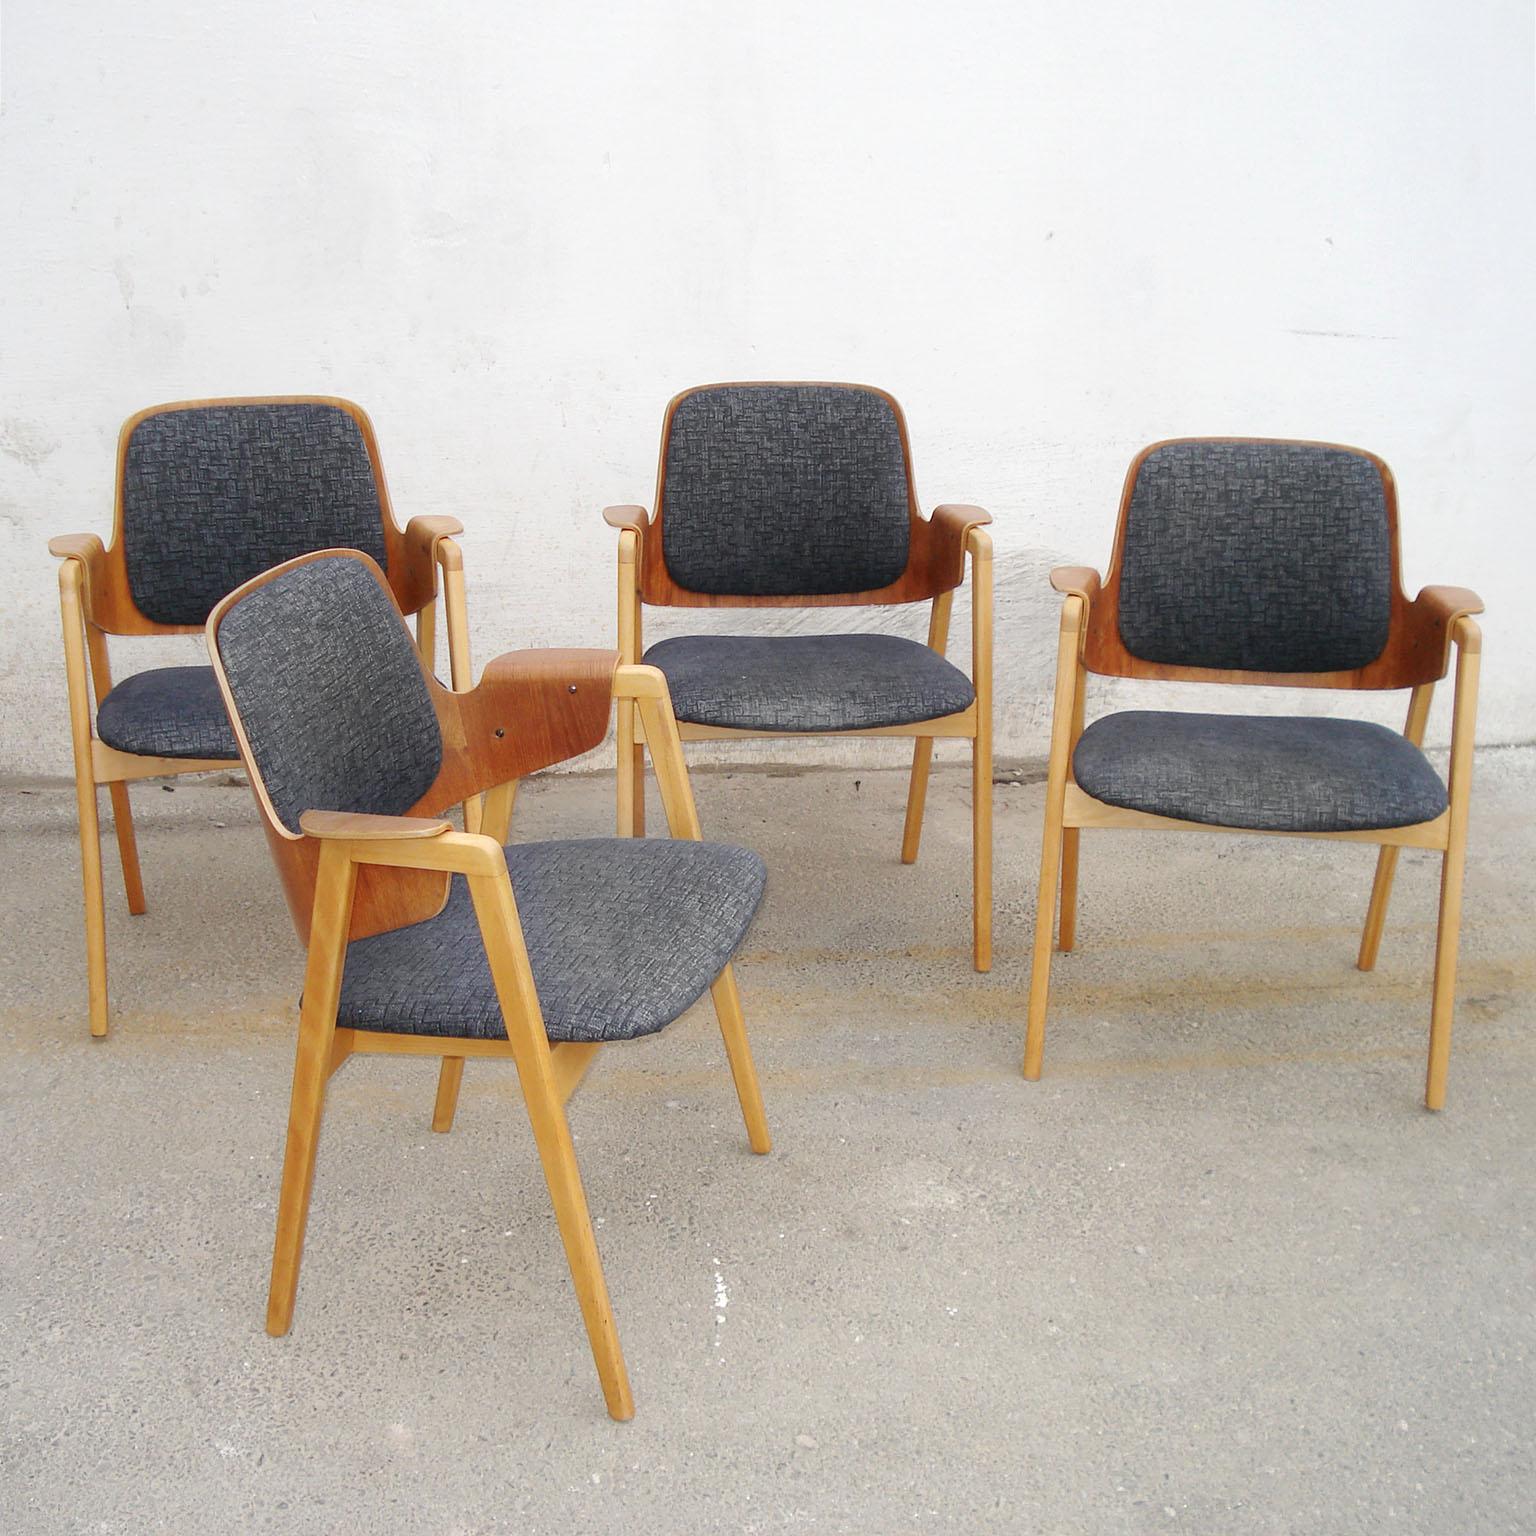 Mid-Century Modern Scandinavian set of four armchairs designed by Elias Barup for Gärsnäs, 1950s.
Armchairs in teak and beech with original upholstery. Very good used condition, with expected patina and wear of time to the armrests. Original labels